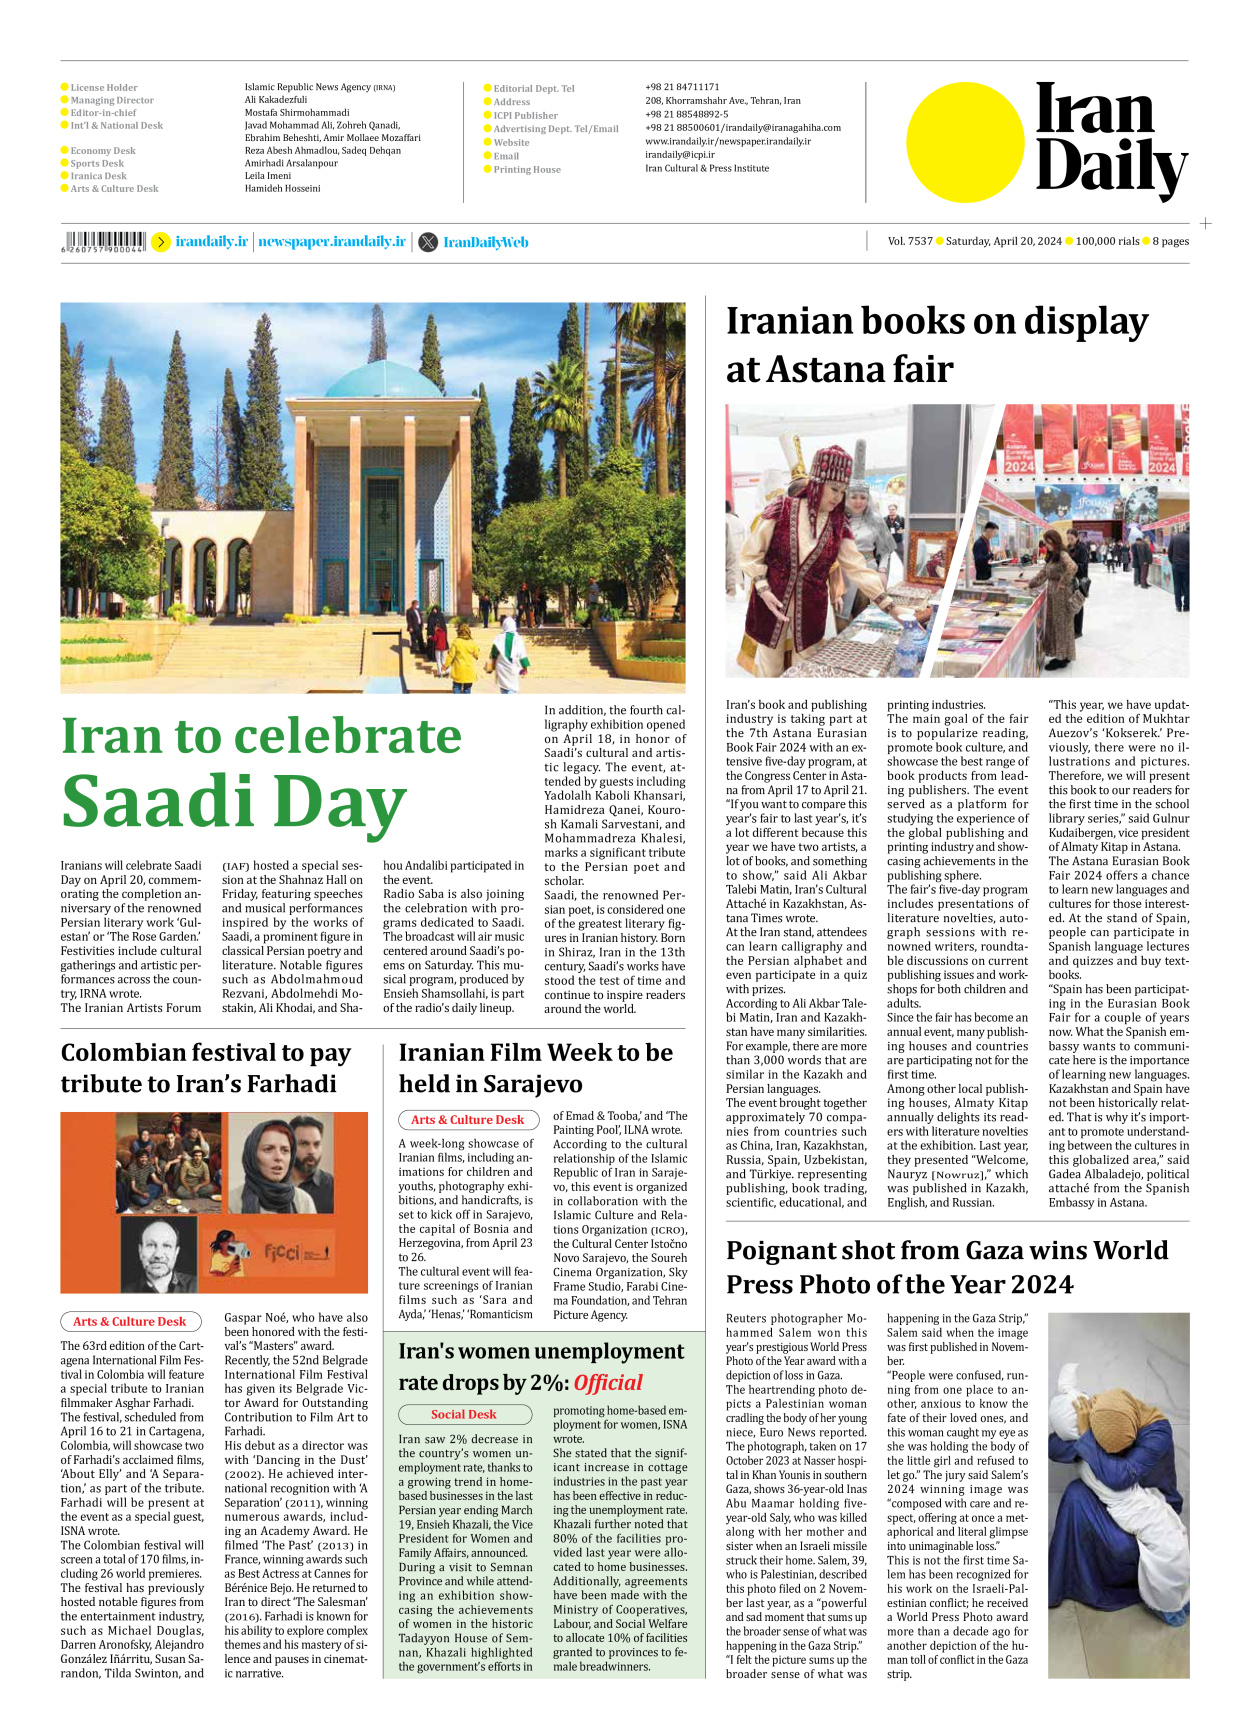 Iran Daily - Number Seven Thousand Five Hundred and Thirty Seven - 20 April 2024 - Page 8